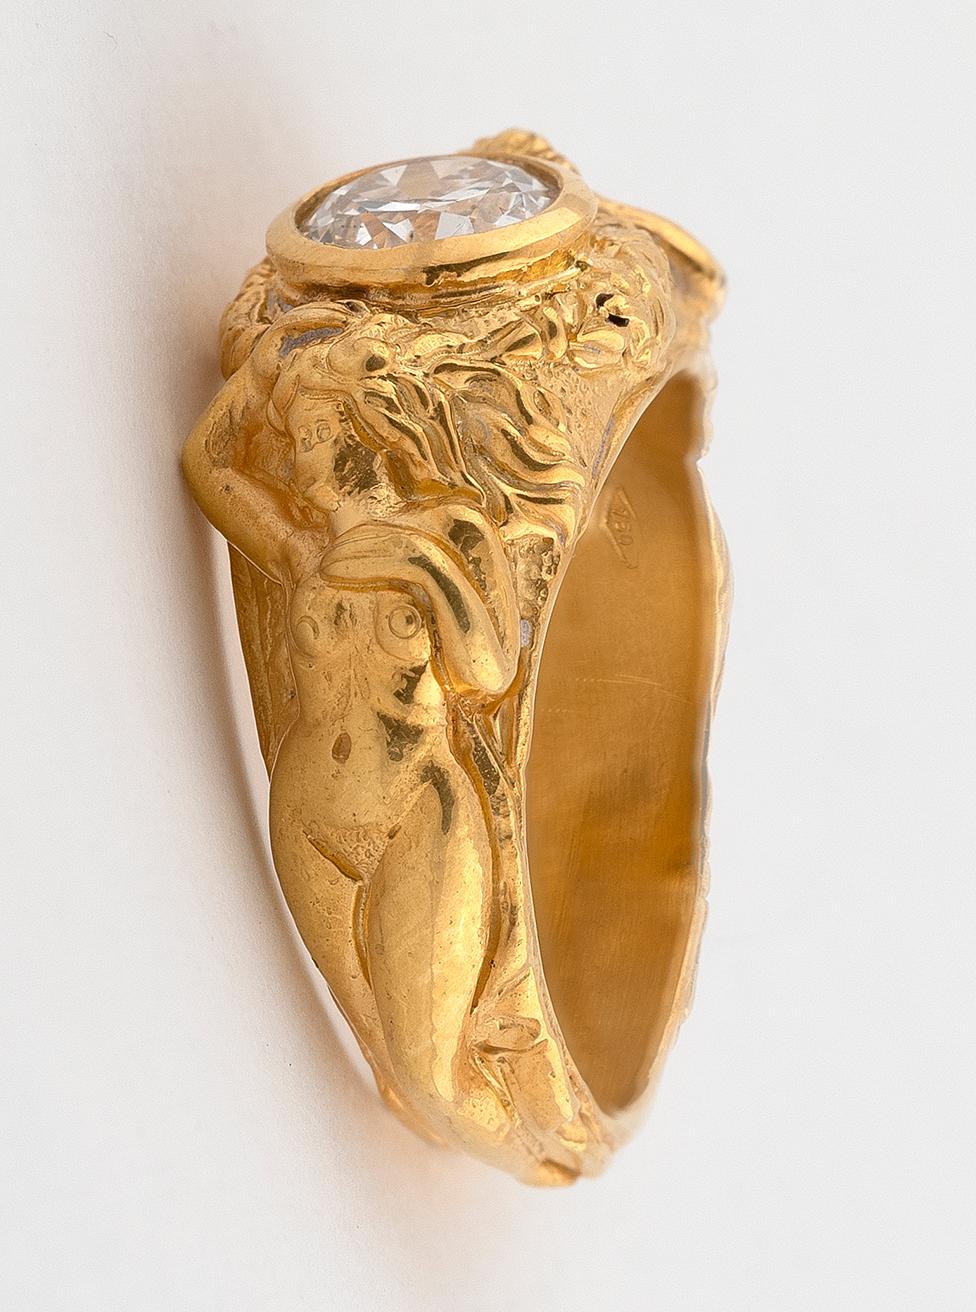  the collet-mounted diamond to a hoop modelled as faun and the virgin emerging from foliage, diamond approx. 
1.20ct.
Size: 8
